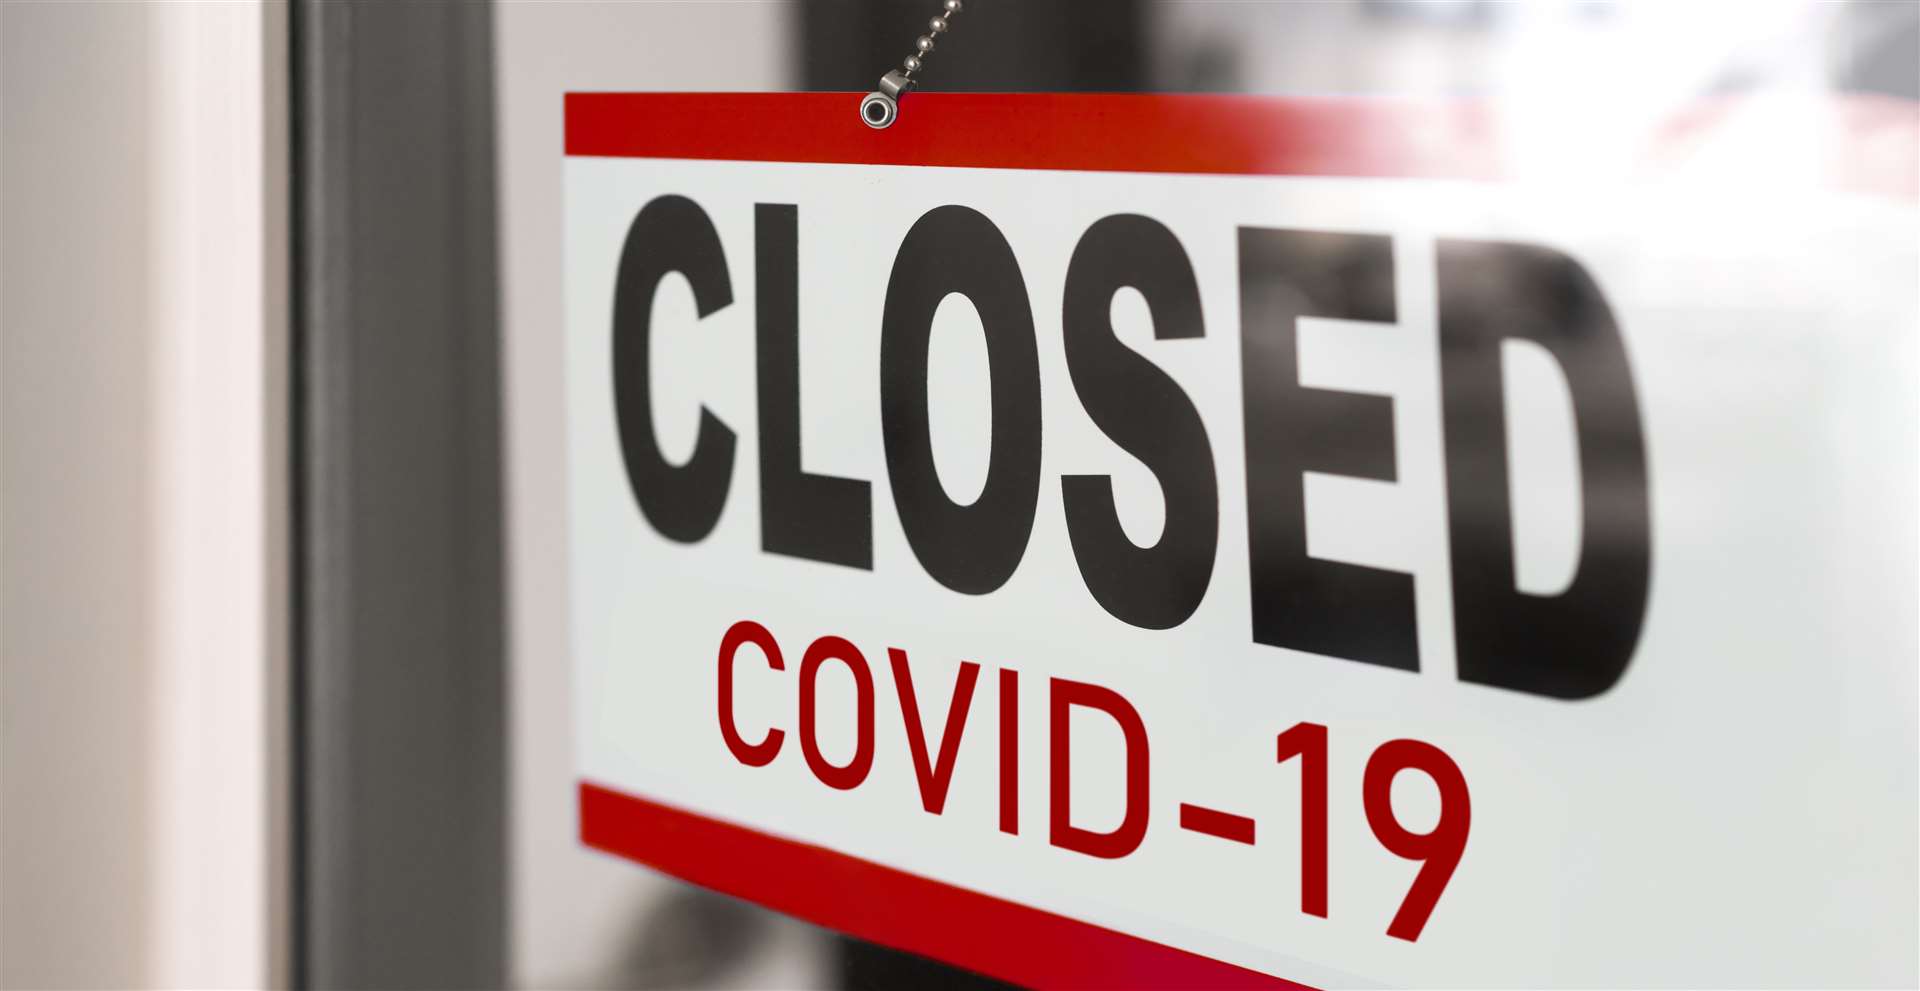 More than half the Highland businesses surveyed are currently closed as a result of the pandemic.